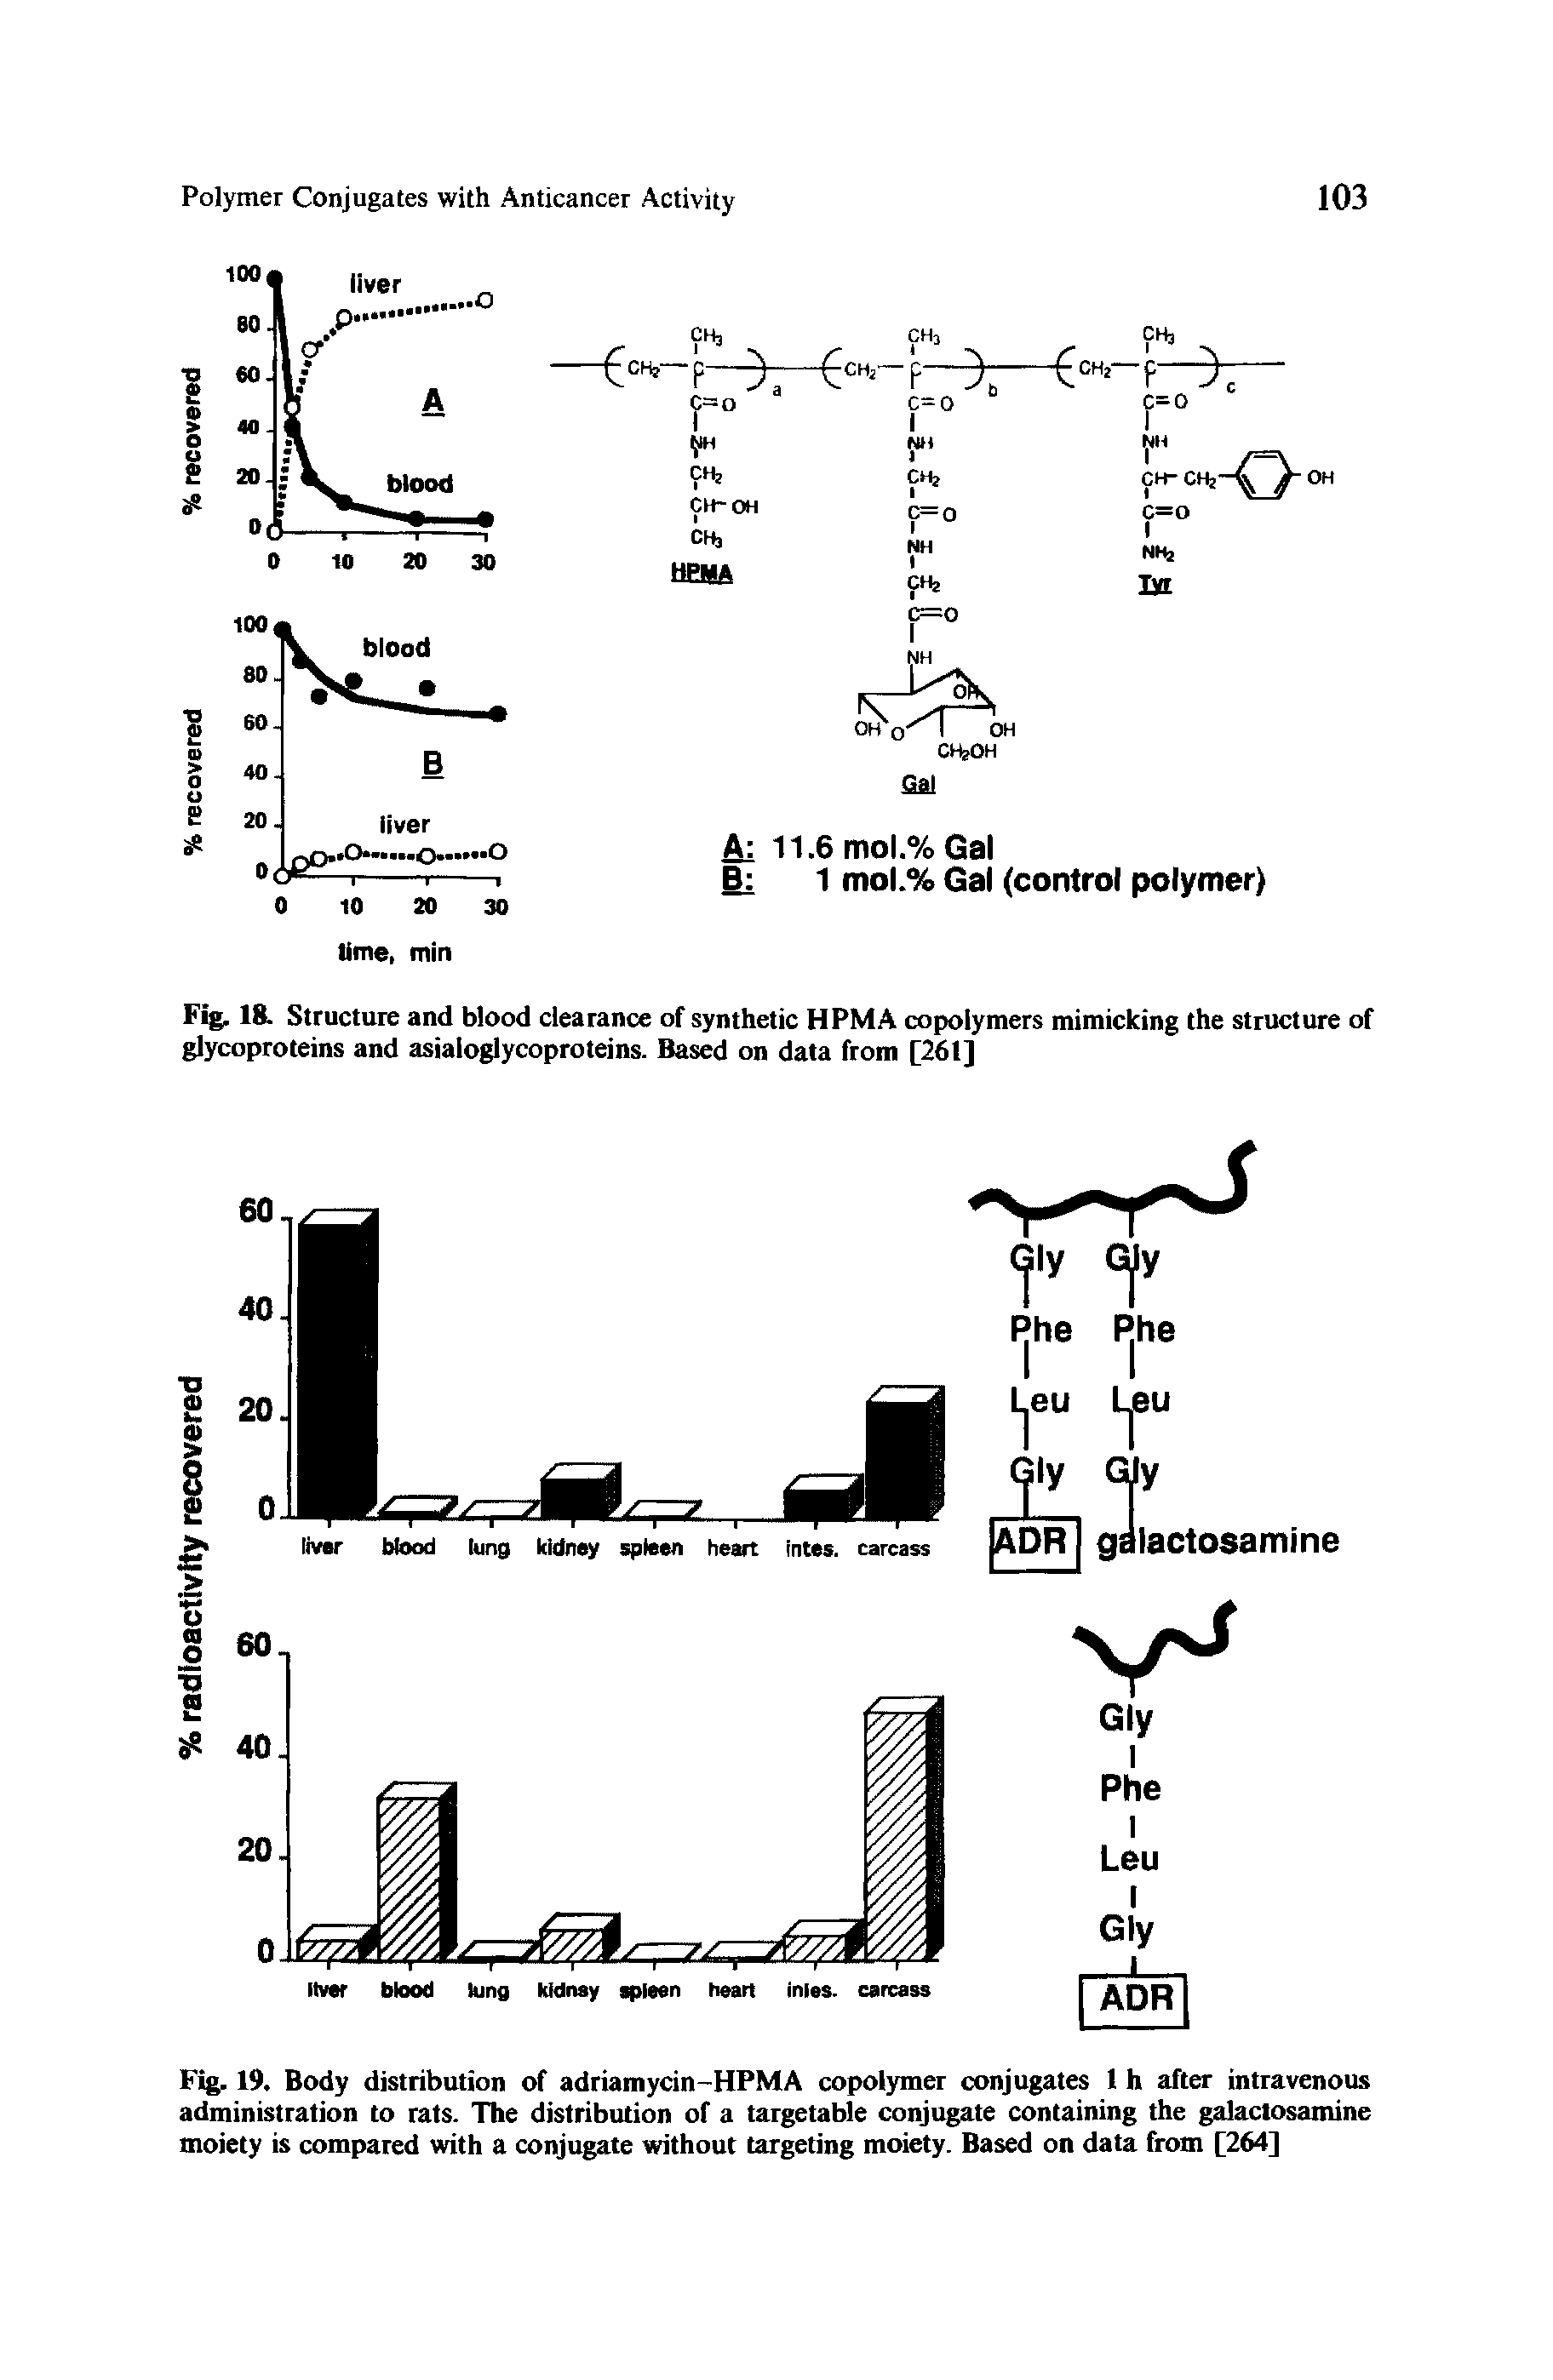 Fig. 19. Body distribution of adriamycin-HPMA copolymer conjugates 1 h after intravenous administration to rats. The distribution of a targetable conjugate containing the galactosamine moiety is compared with a conjugate without targeting moiety. Based on data from [264]...